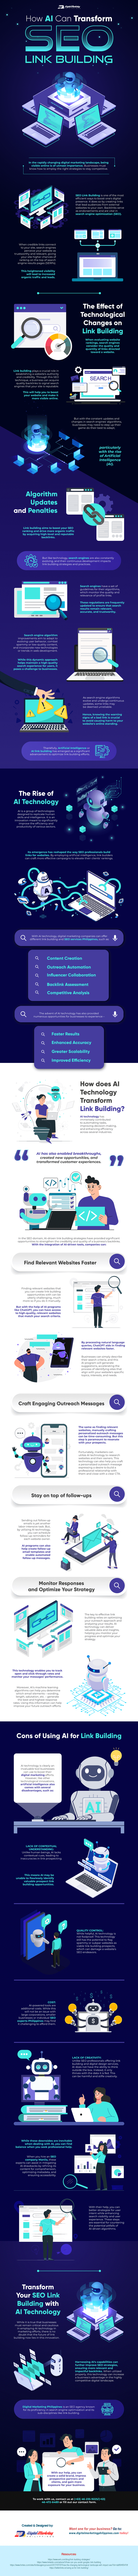 How AI Can Transform SEO Link Building? Infographic